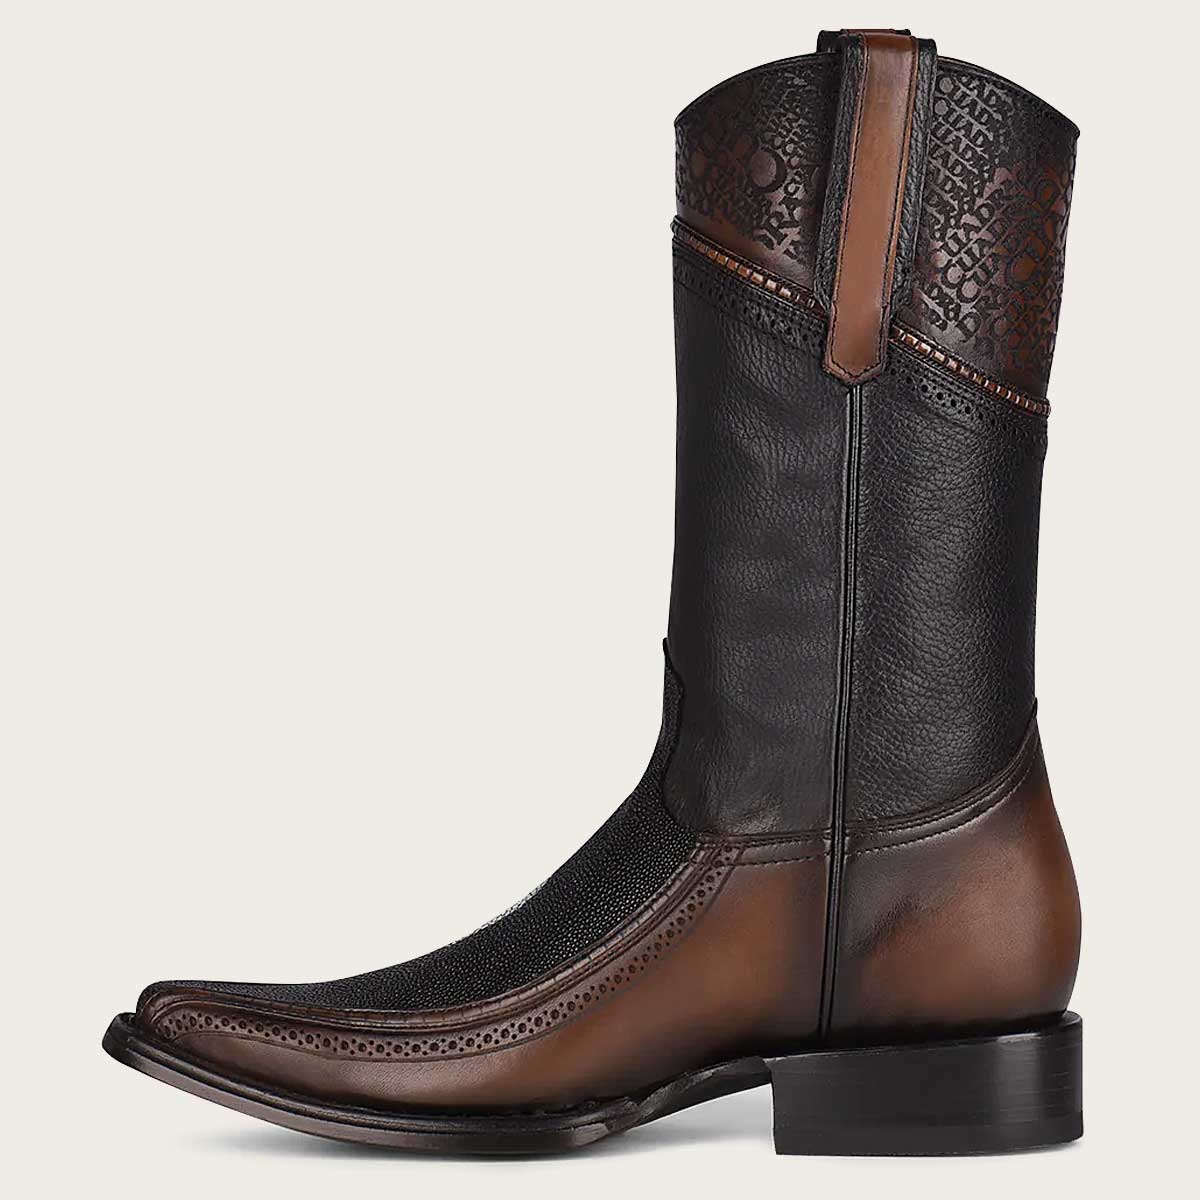 Authentic cowboy boot with intricate engravings and timeless style for a classic Western look.